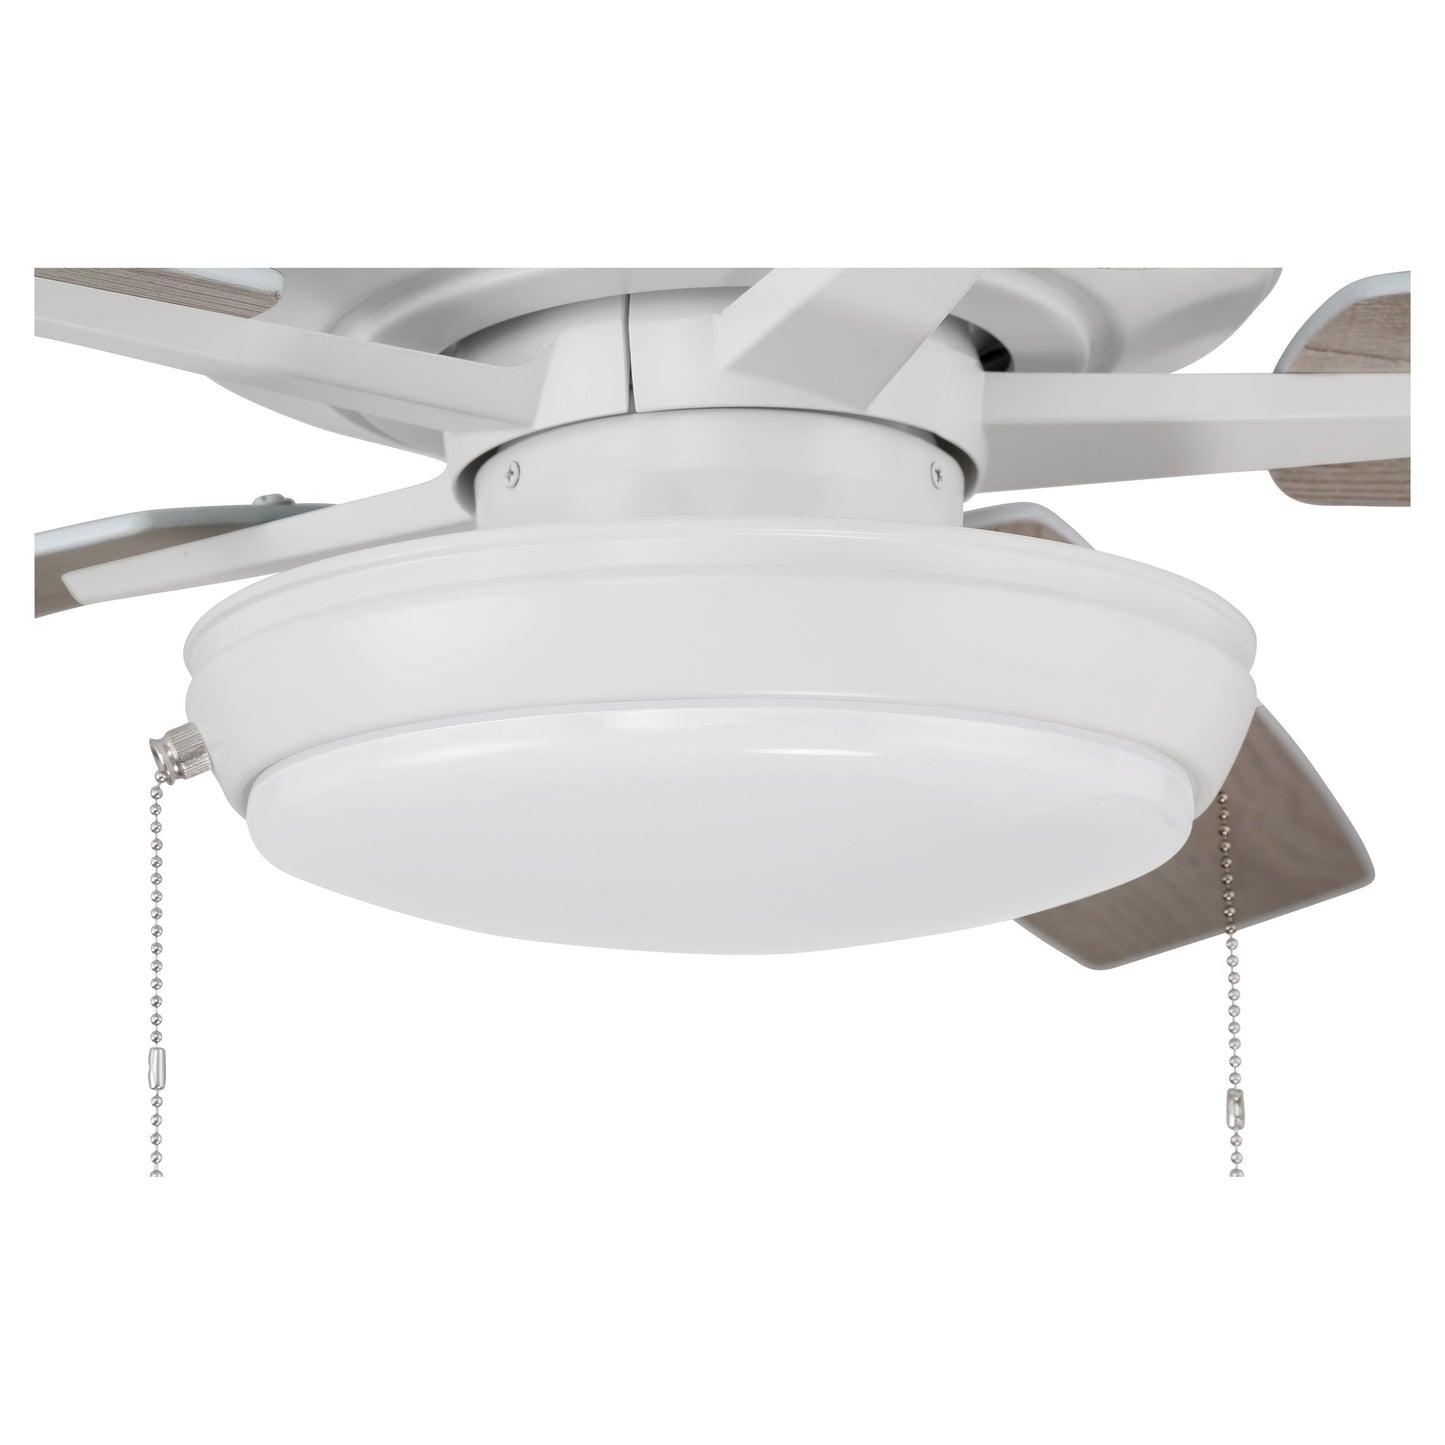 S119W5-60WWOK - Super Pro 119 60" 5 Blade Ceiling Fan with Light Kit - Pull Chain - White